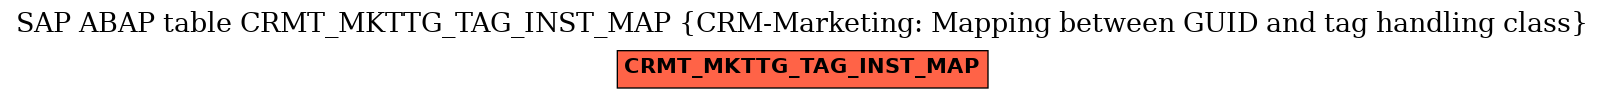 E-R Diagram for table CRMT_MKTTG_TAG_INST_MAP (CRM-Marketing: Mapping between GUID and tag handling class)